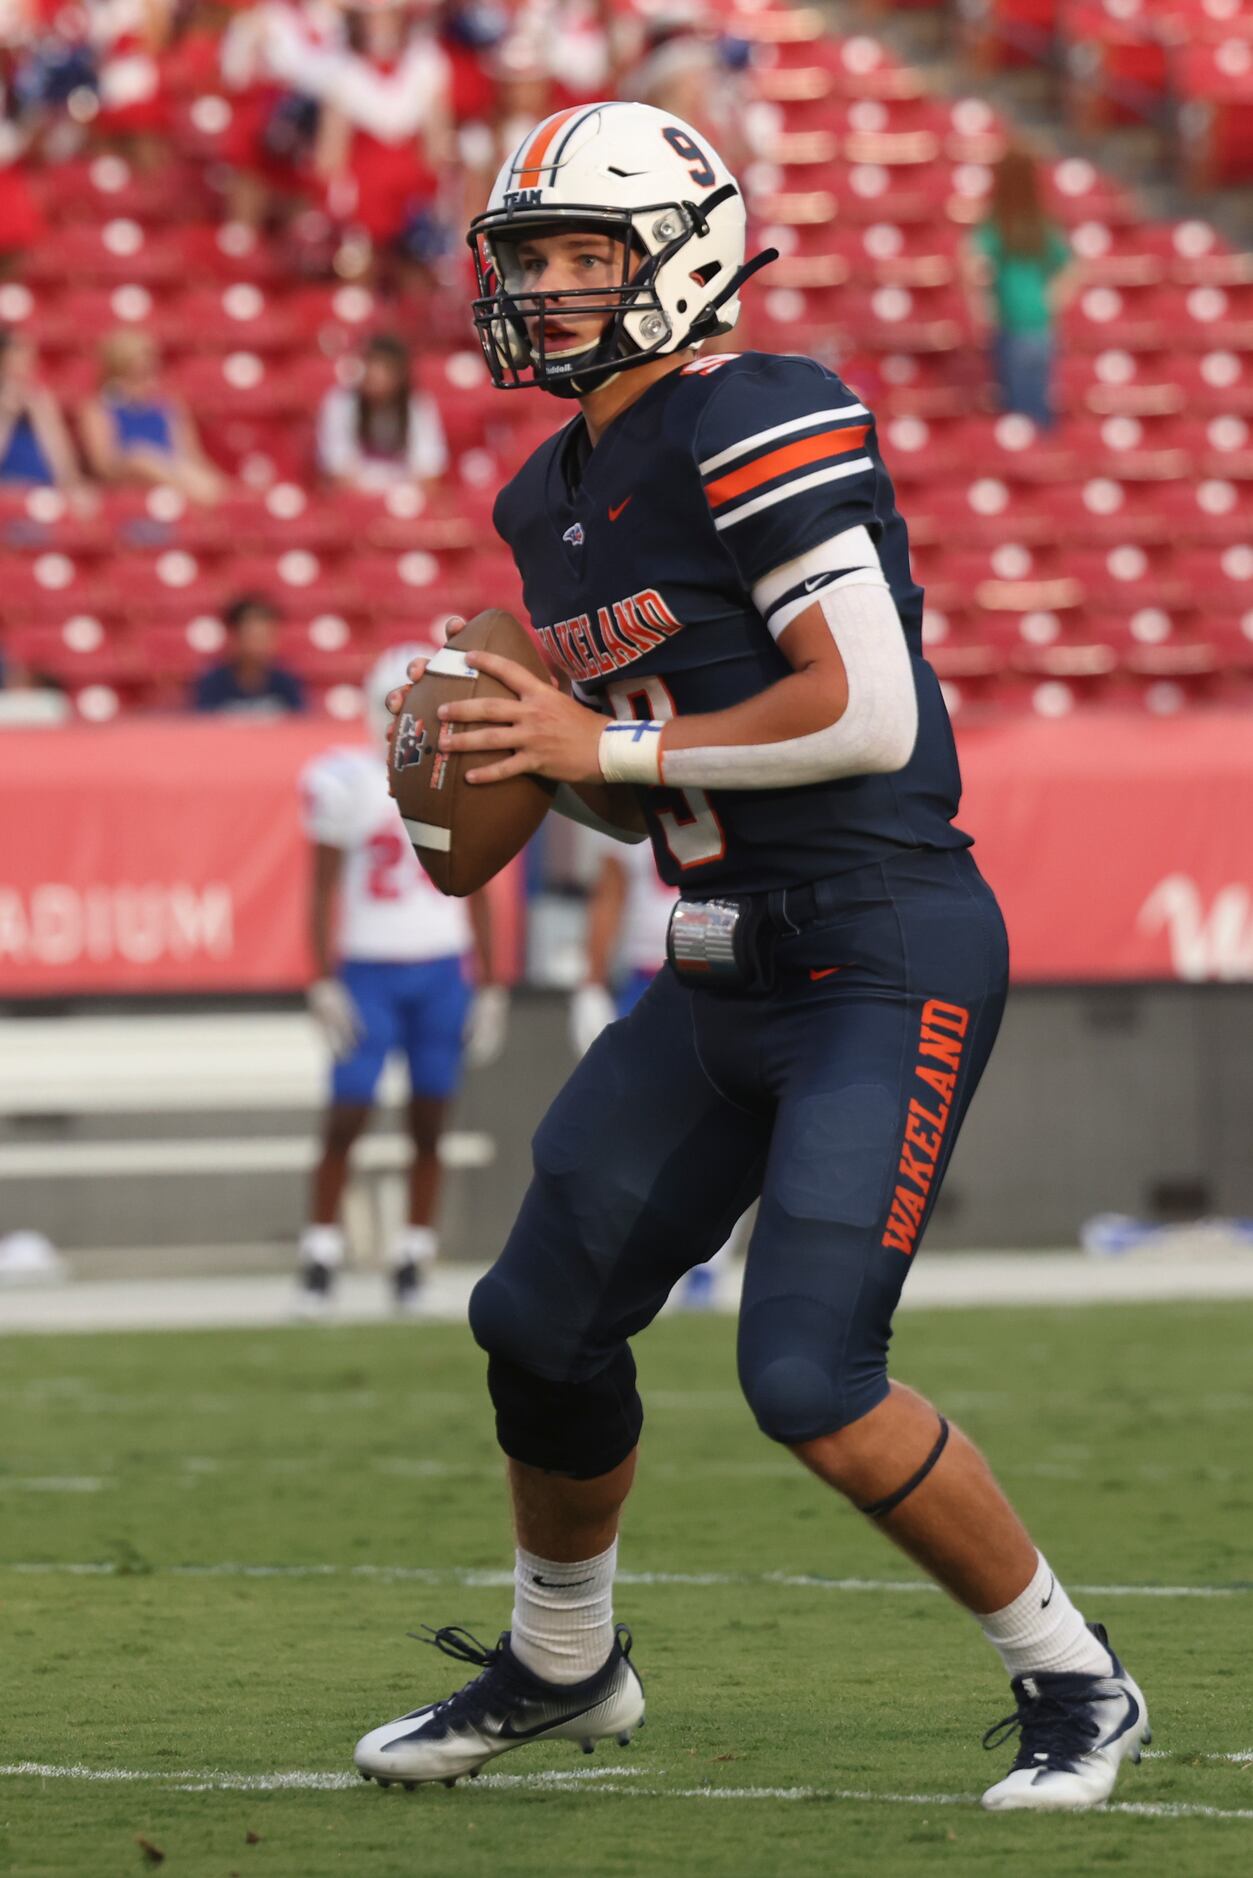 Wakeland High School’s quarterback Brennan Myer (9) looks to throw a pass during the first...